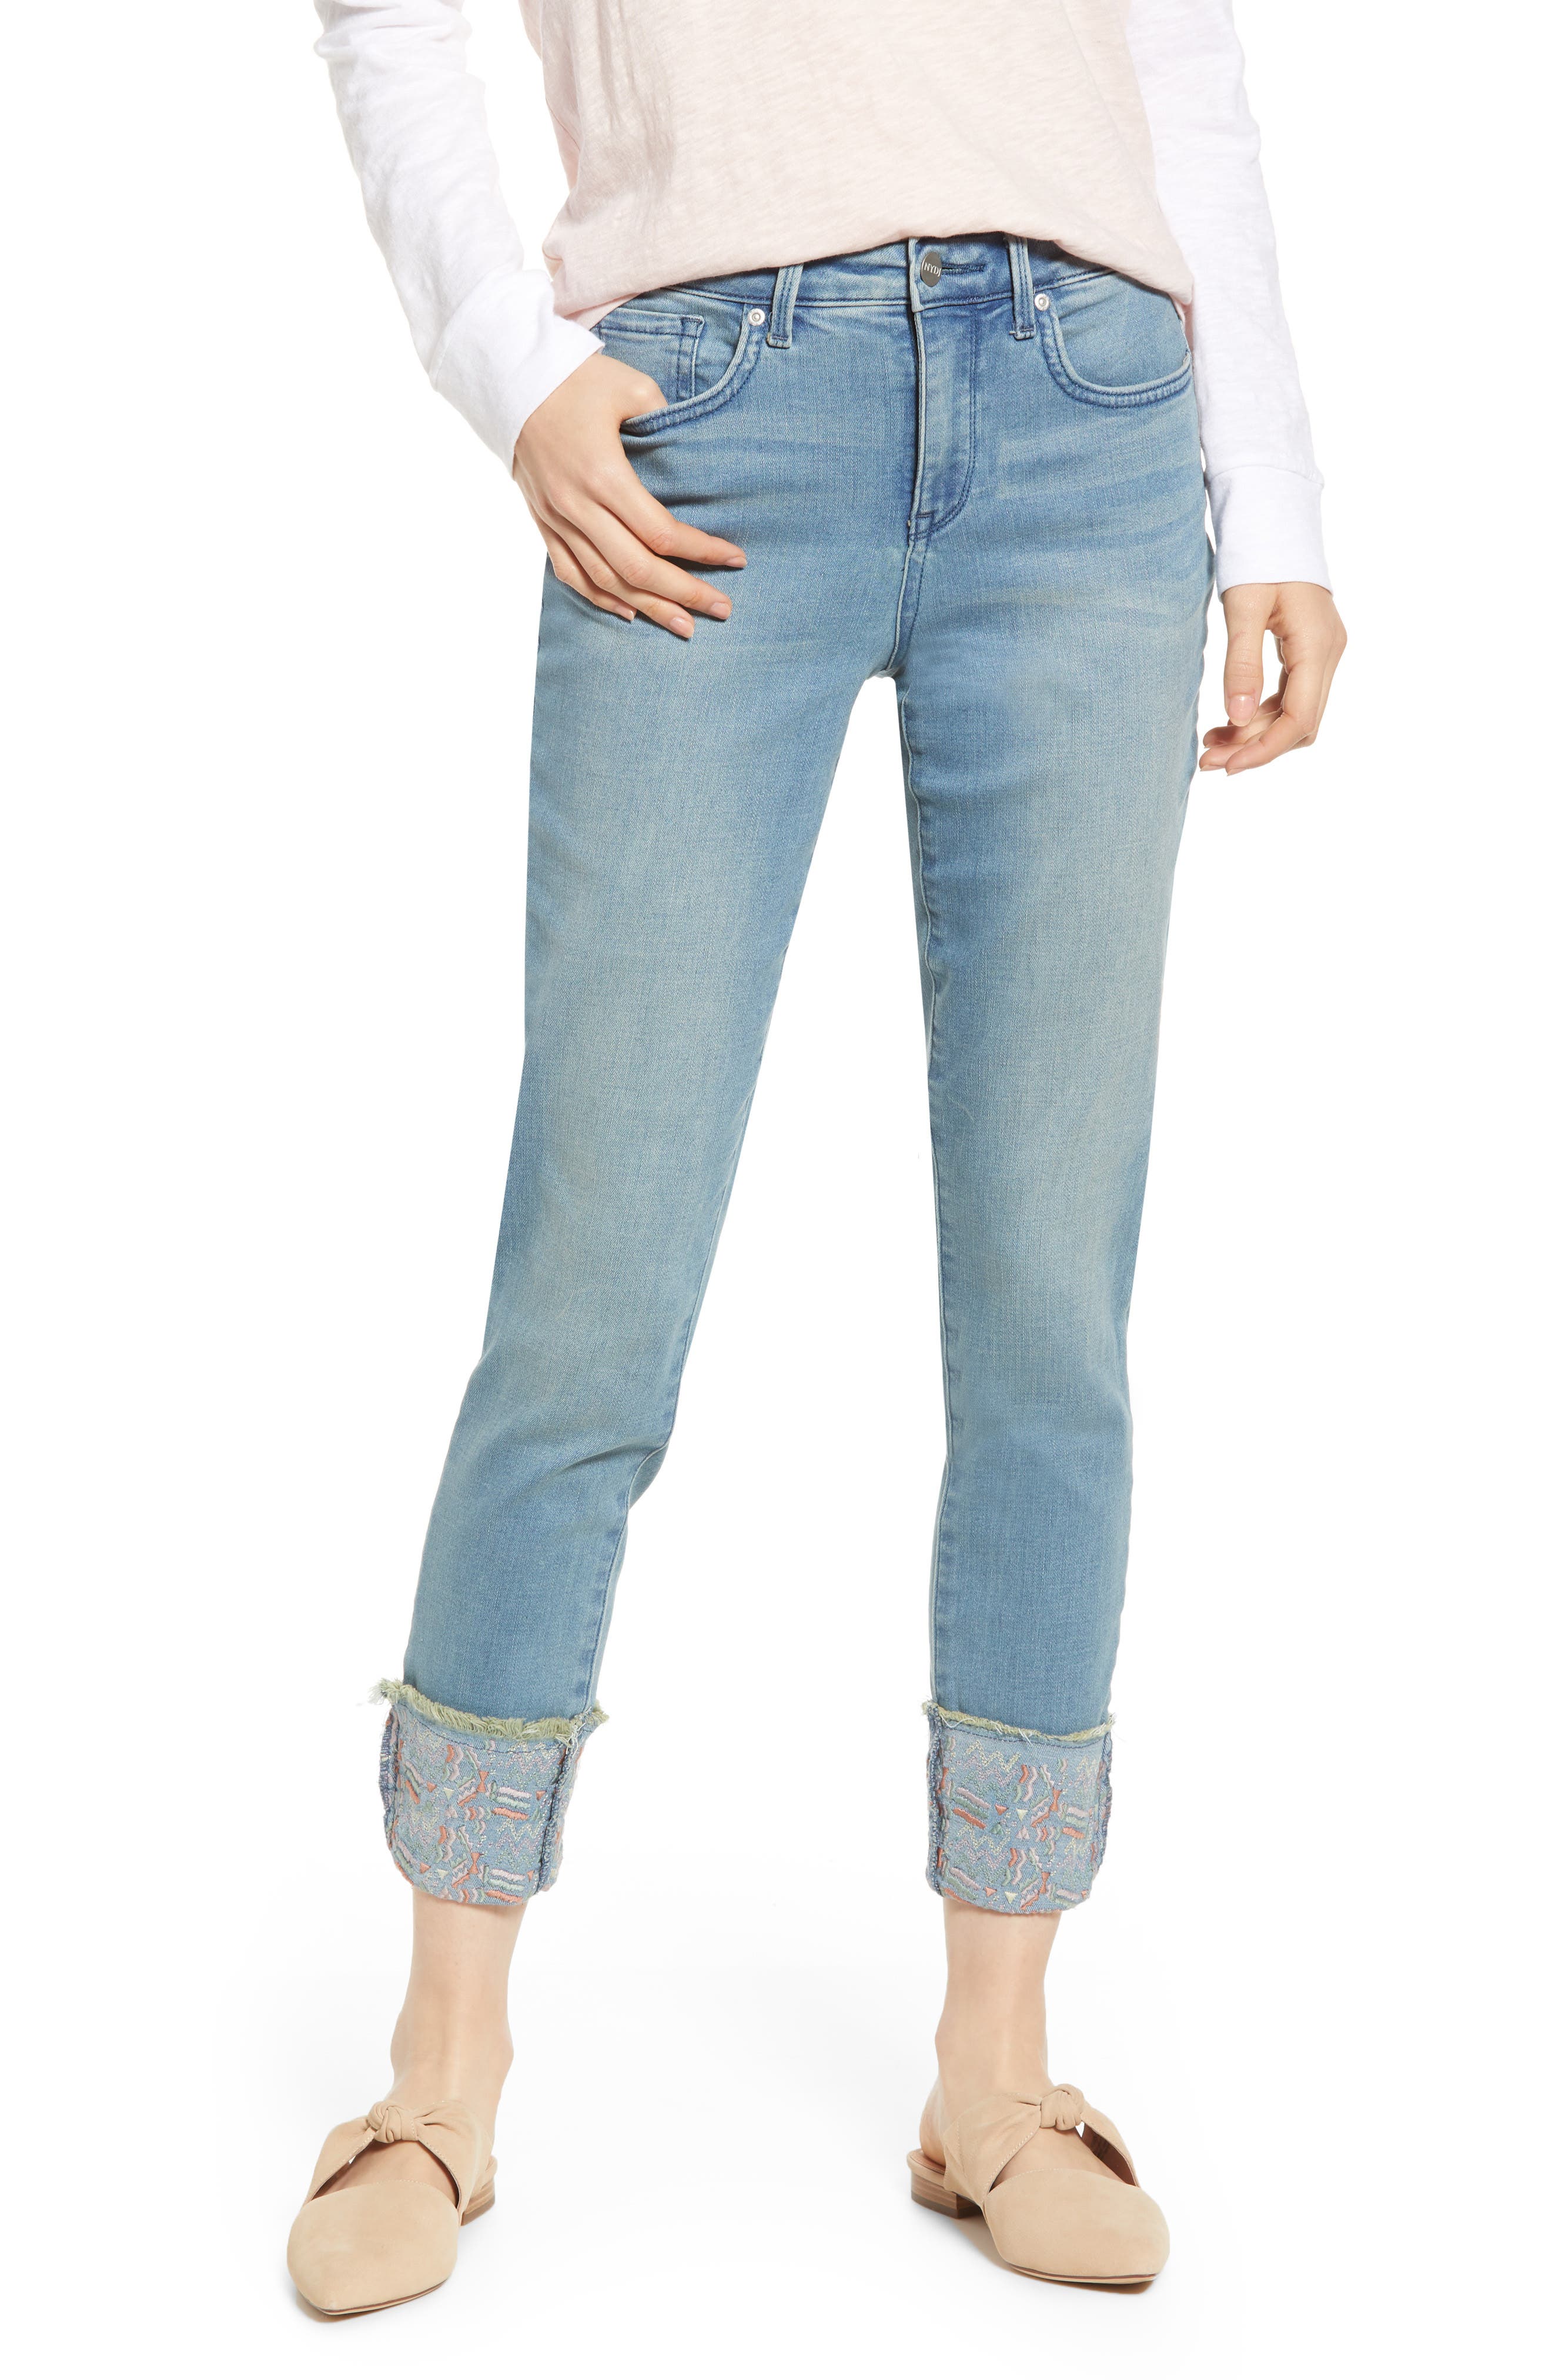 jeans with elastic ankle cuff